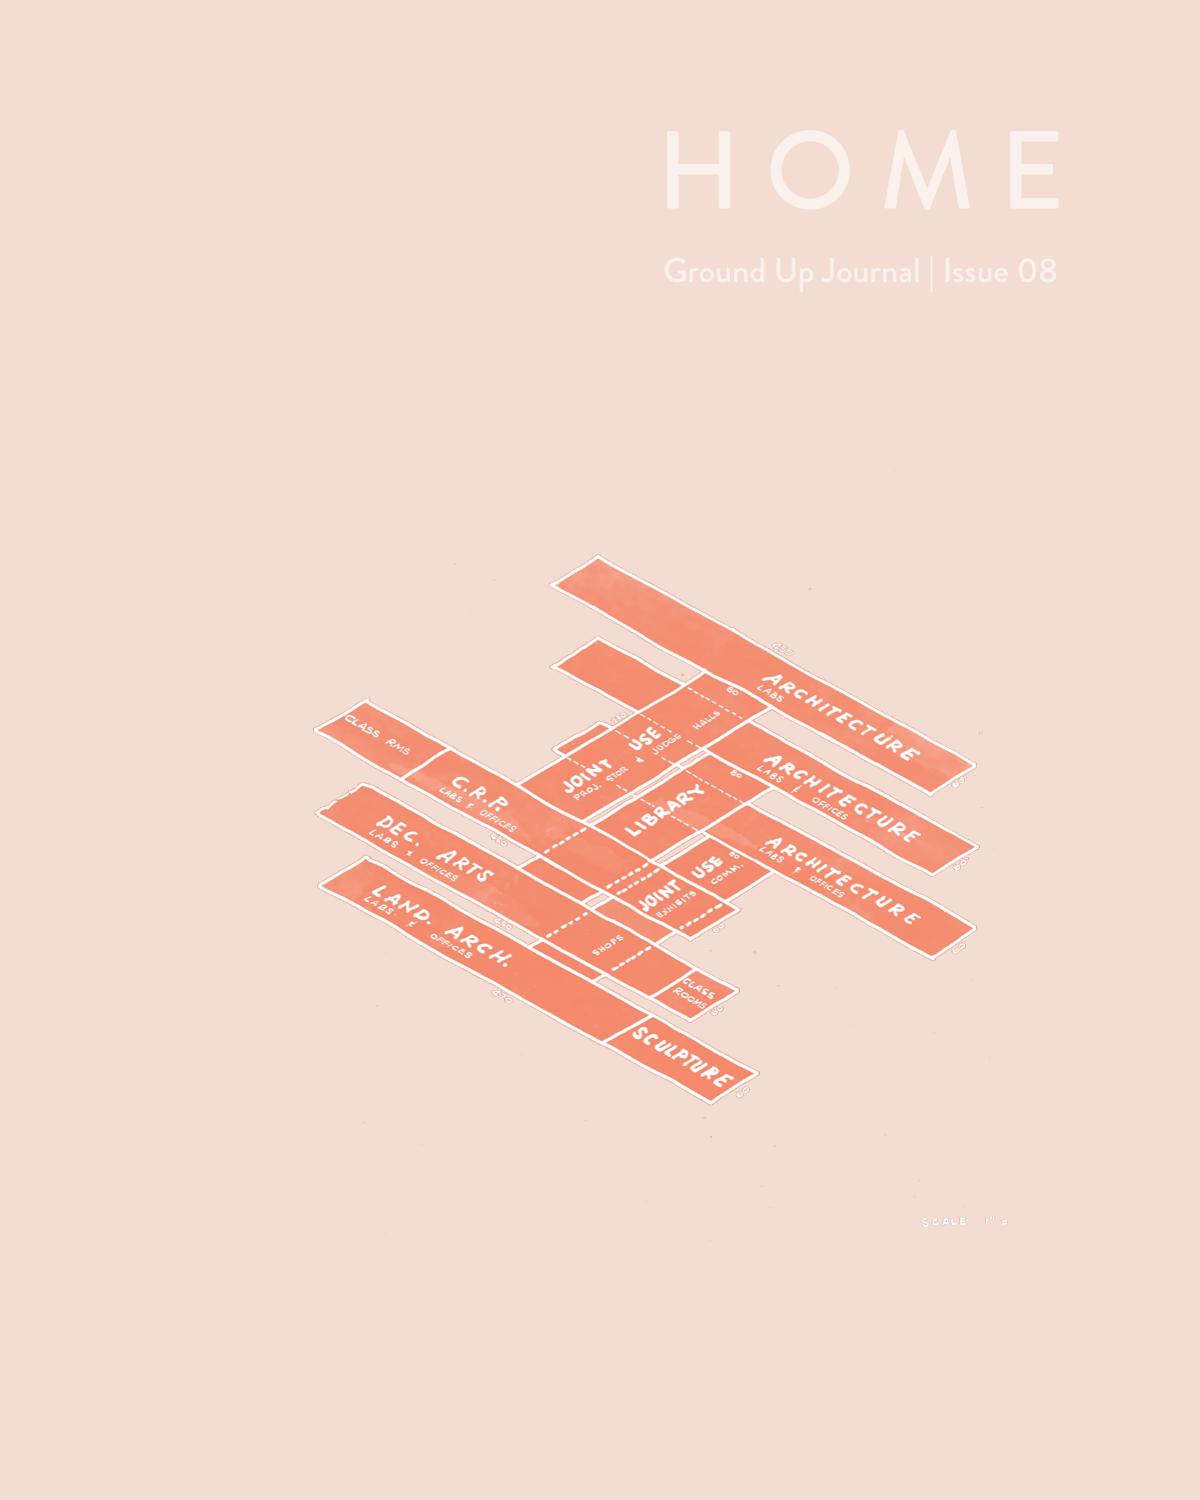 Ground Up Journal Issue 08: Home